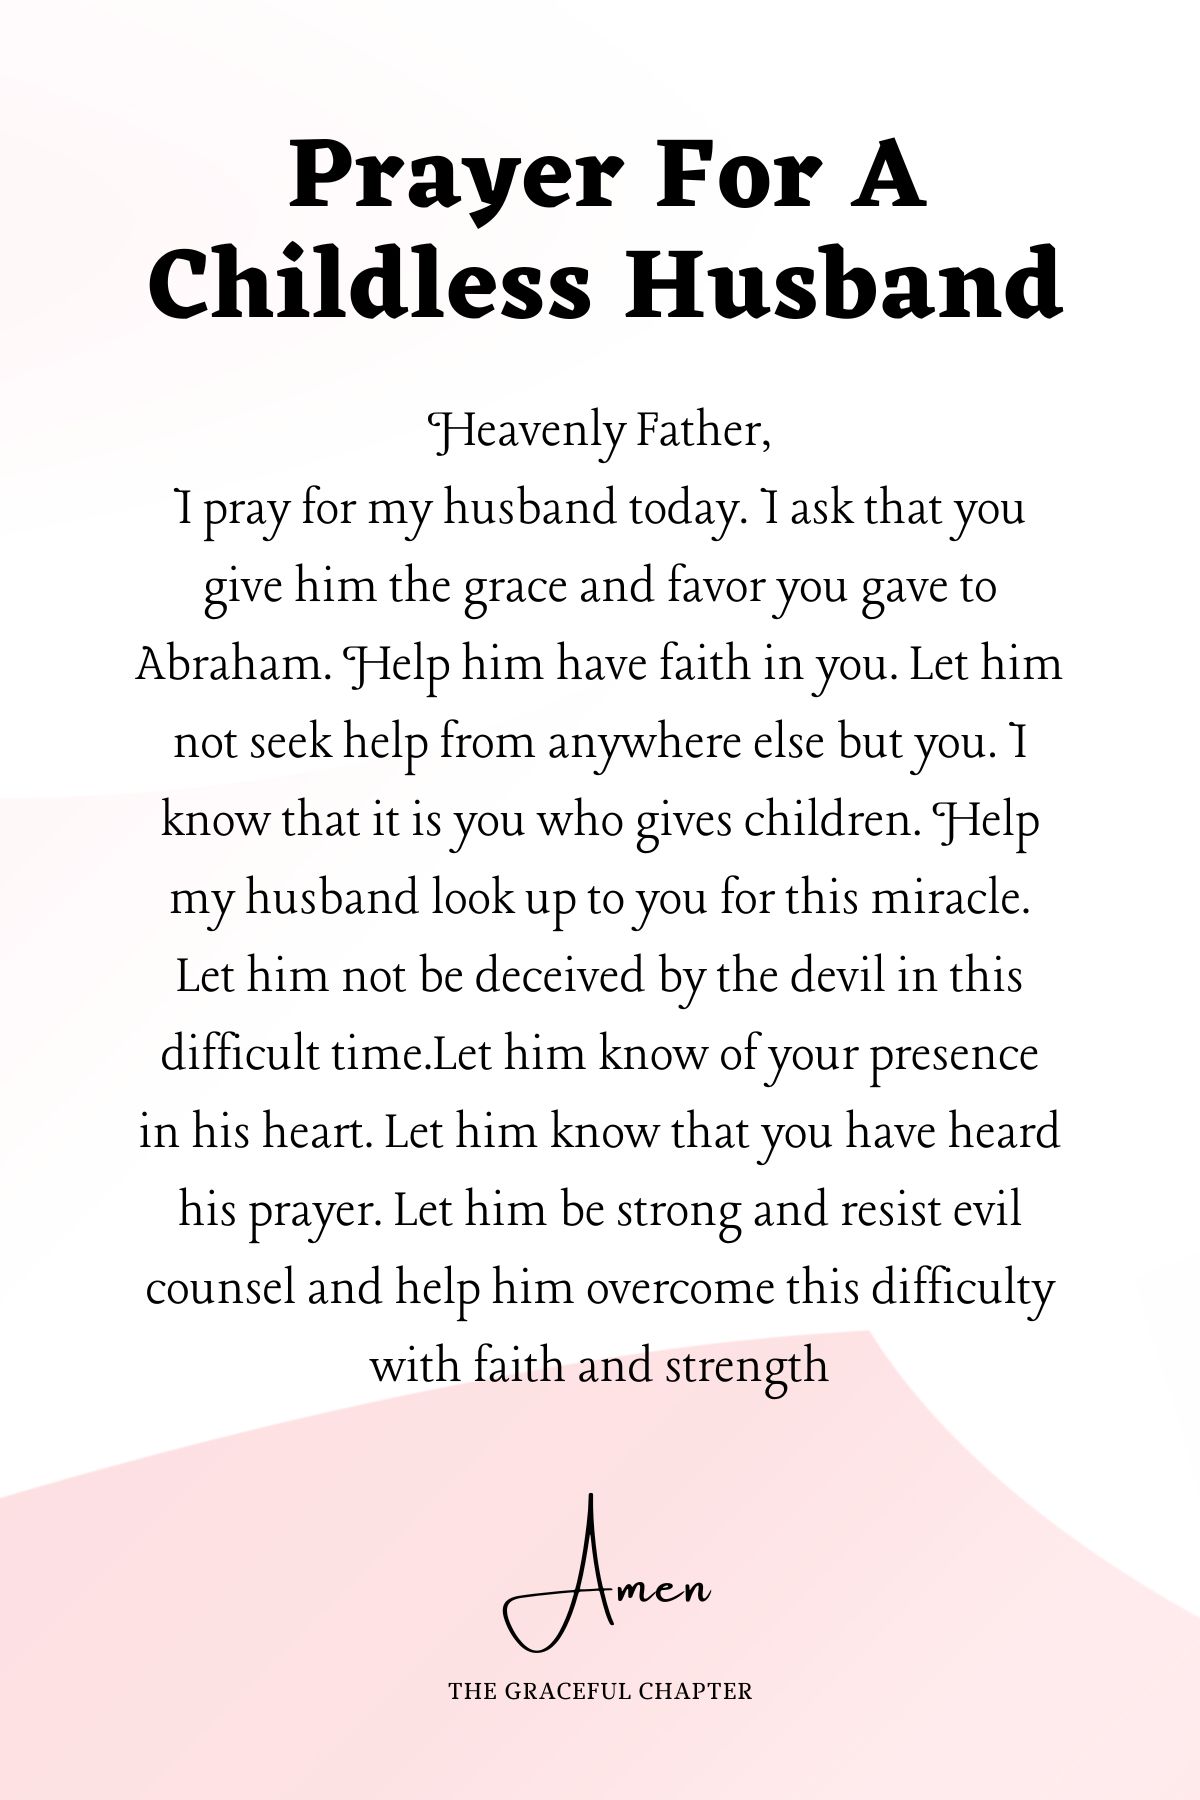 Prayer for a childless husband - Prayers For The Fruit Of The Womb